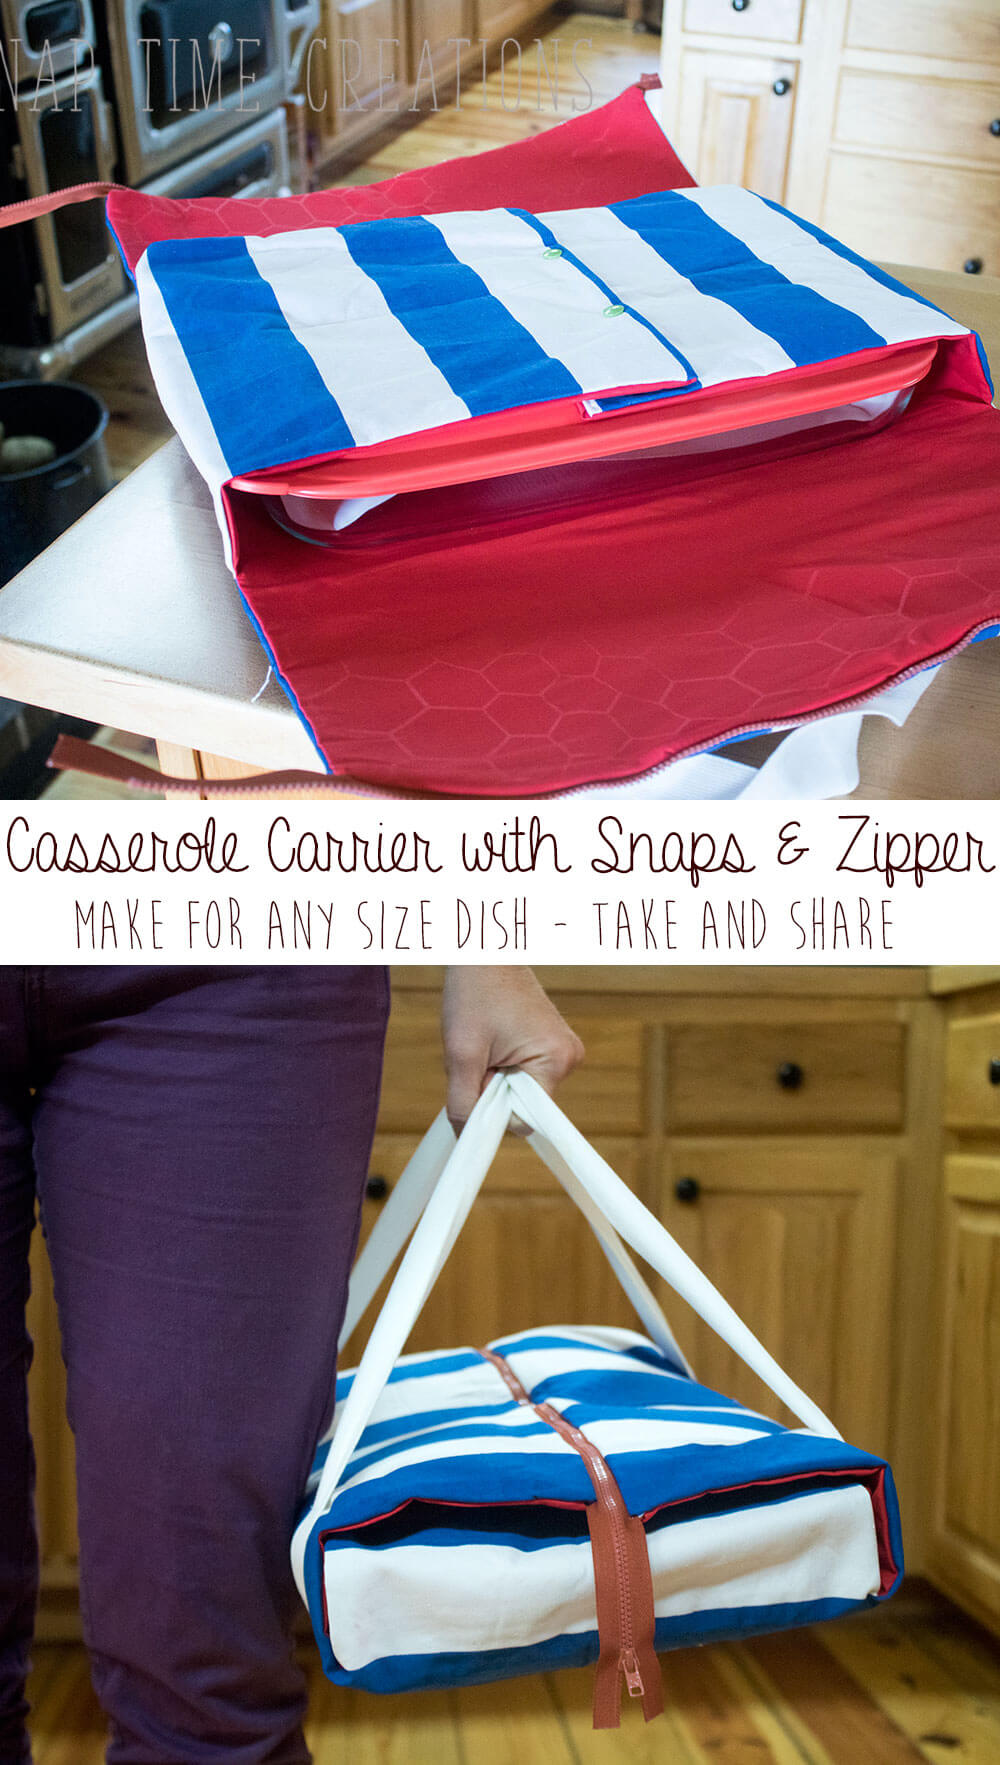 casserole carrier with zipper and-snaps-for-bake-and-take-meals-from-Nap-Time-Creations